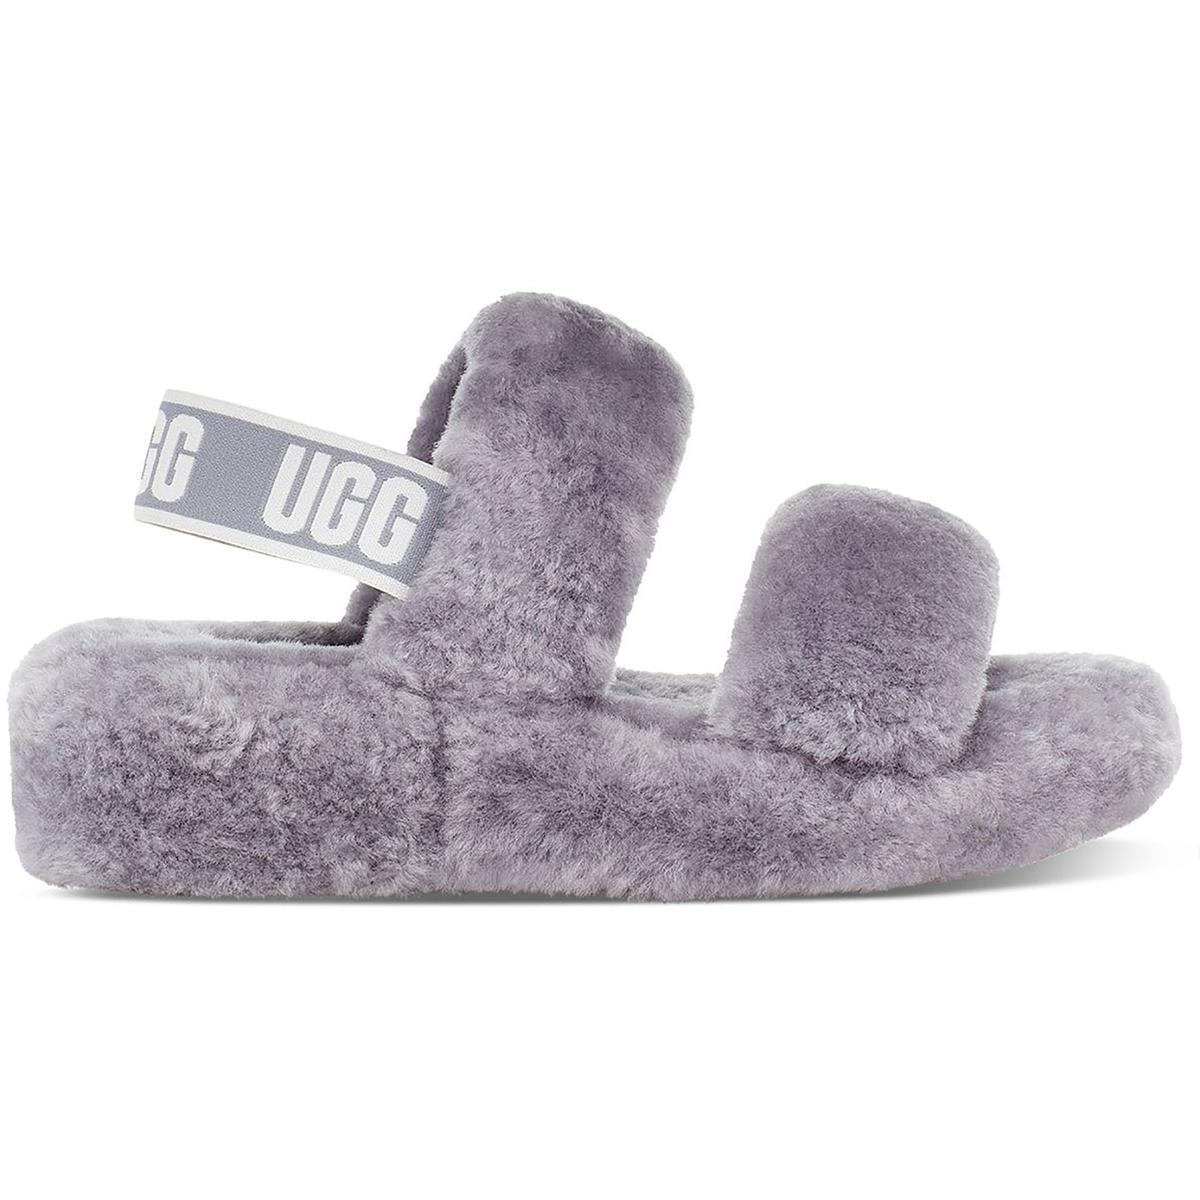 Ugg Womens Oh Yeah Shearling Open Toe Comfy Slip-on Slippers Shoes Bhfo 8751 - Soft Amethyst